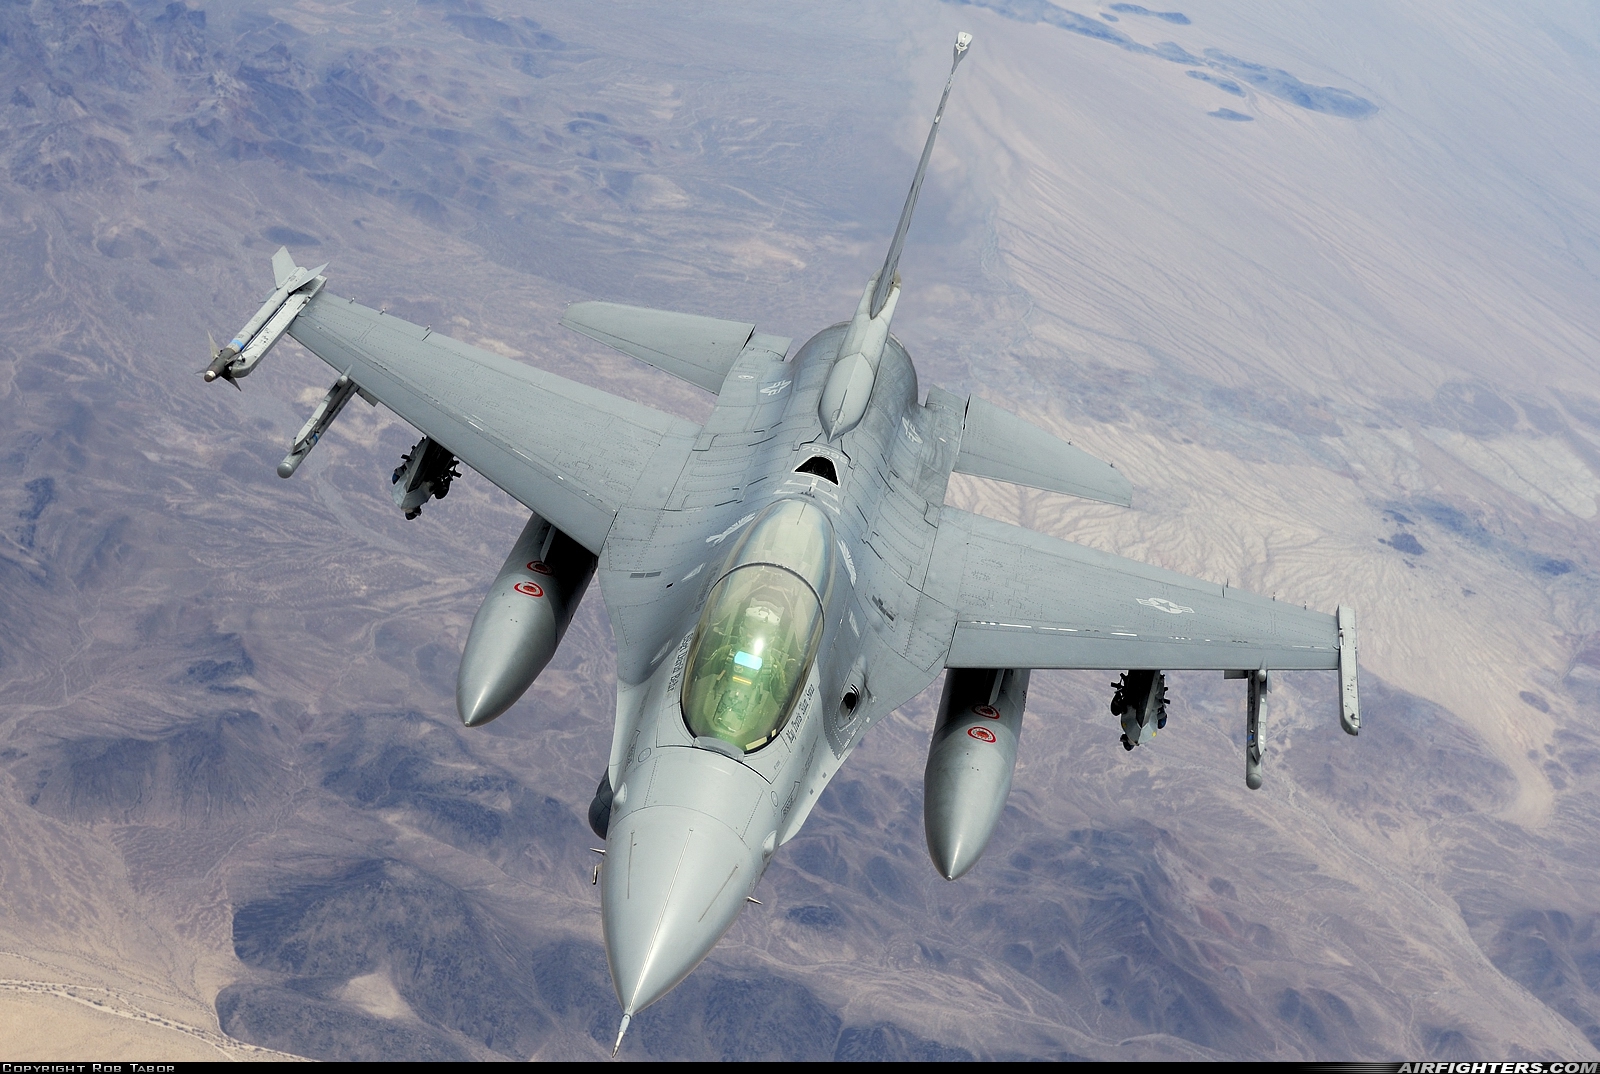 USA - Air Force General Dynamics F-16D Fighting Falcon 87-0395 at In Flight, USA